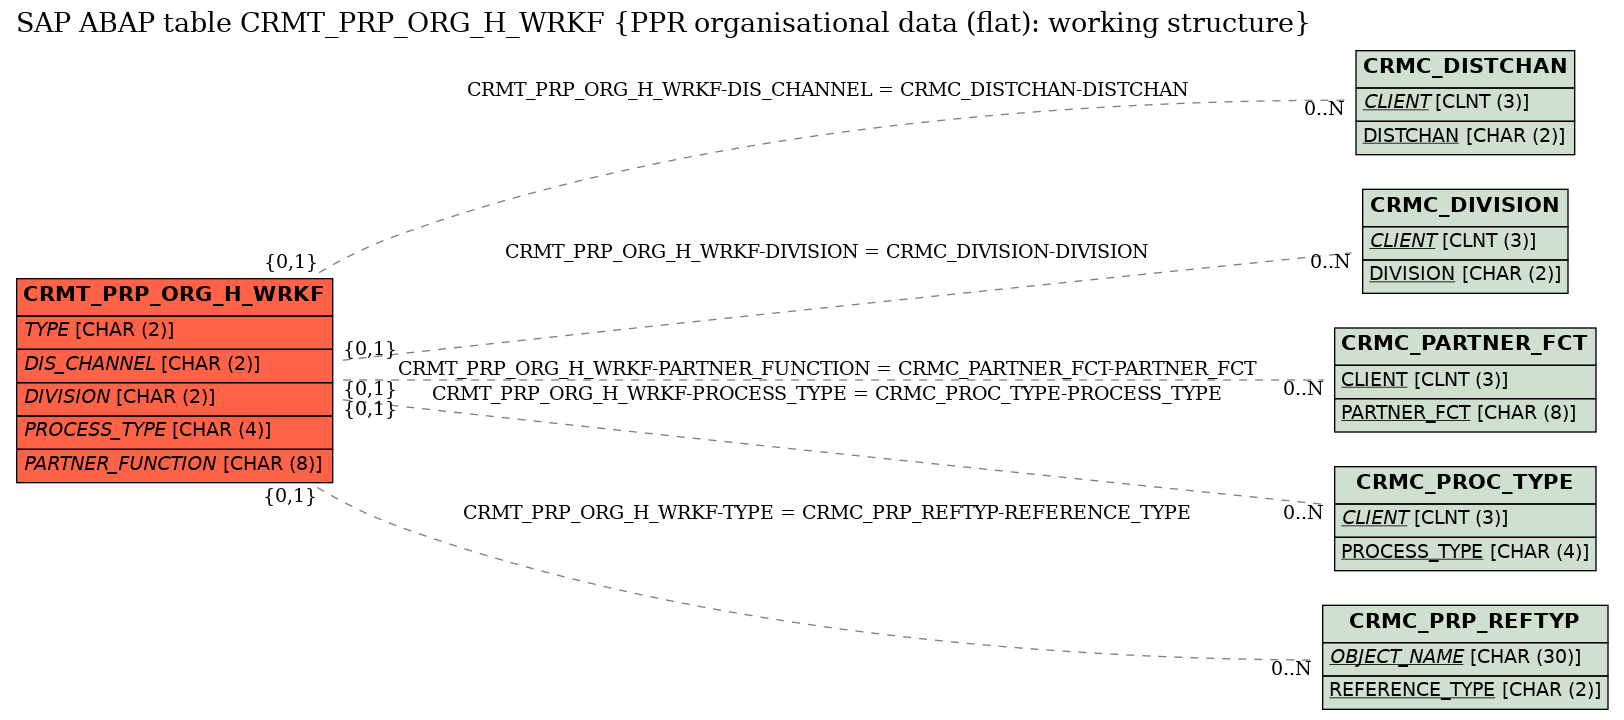 E-R Diagram for table CRMT_PRP_ORG_H_WRKF (PPR organisational data (flat): working structure)